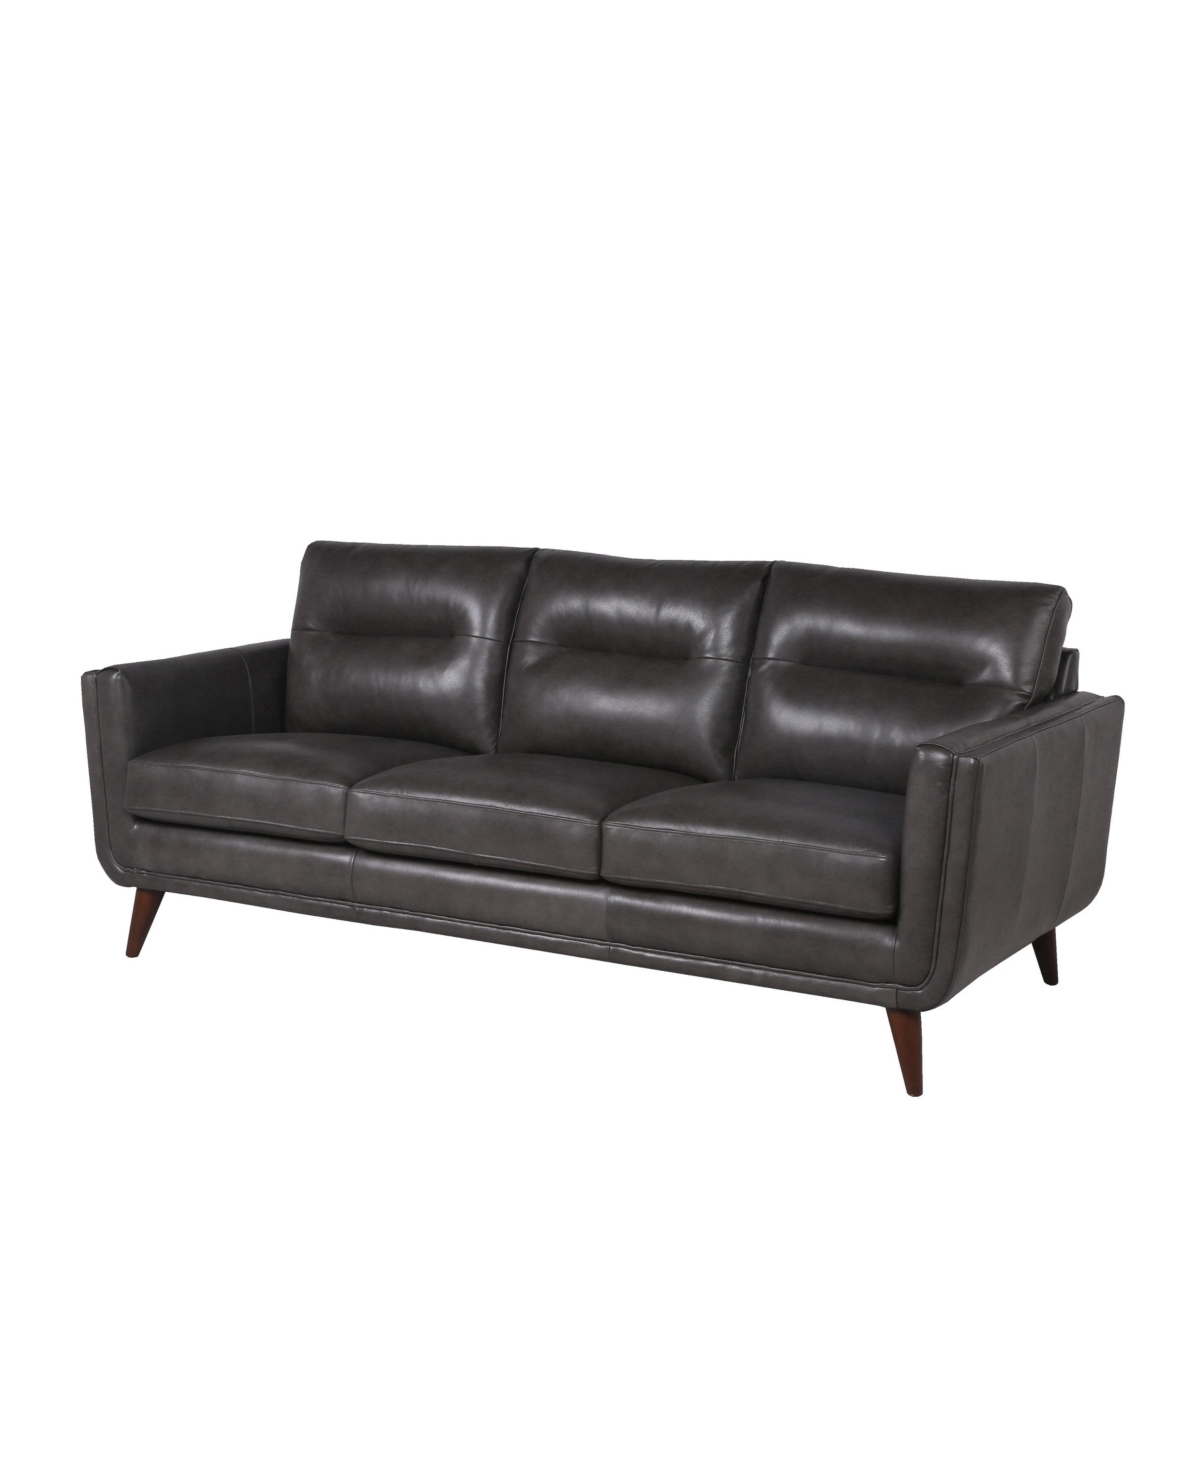 Nice Link Ava 84" Mid-century Modern Leather Sofa In Charcoal Gray